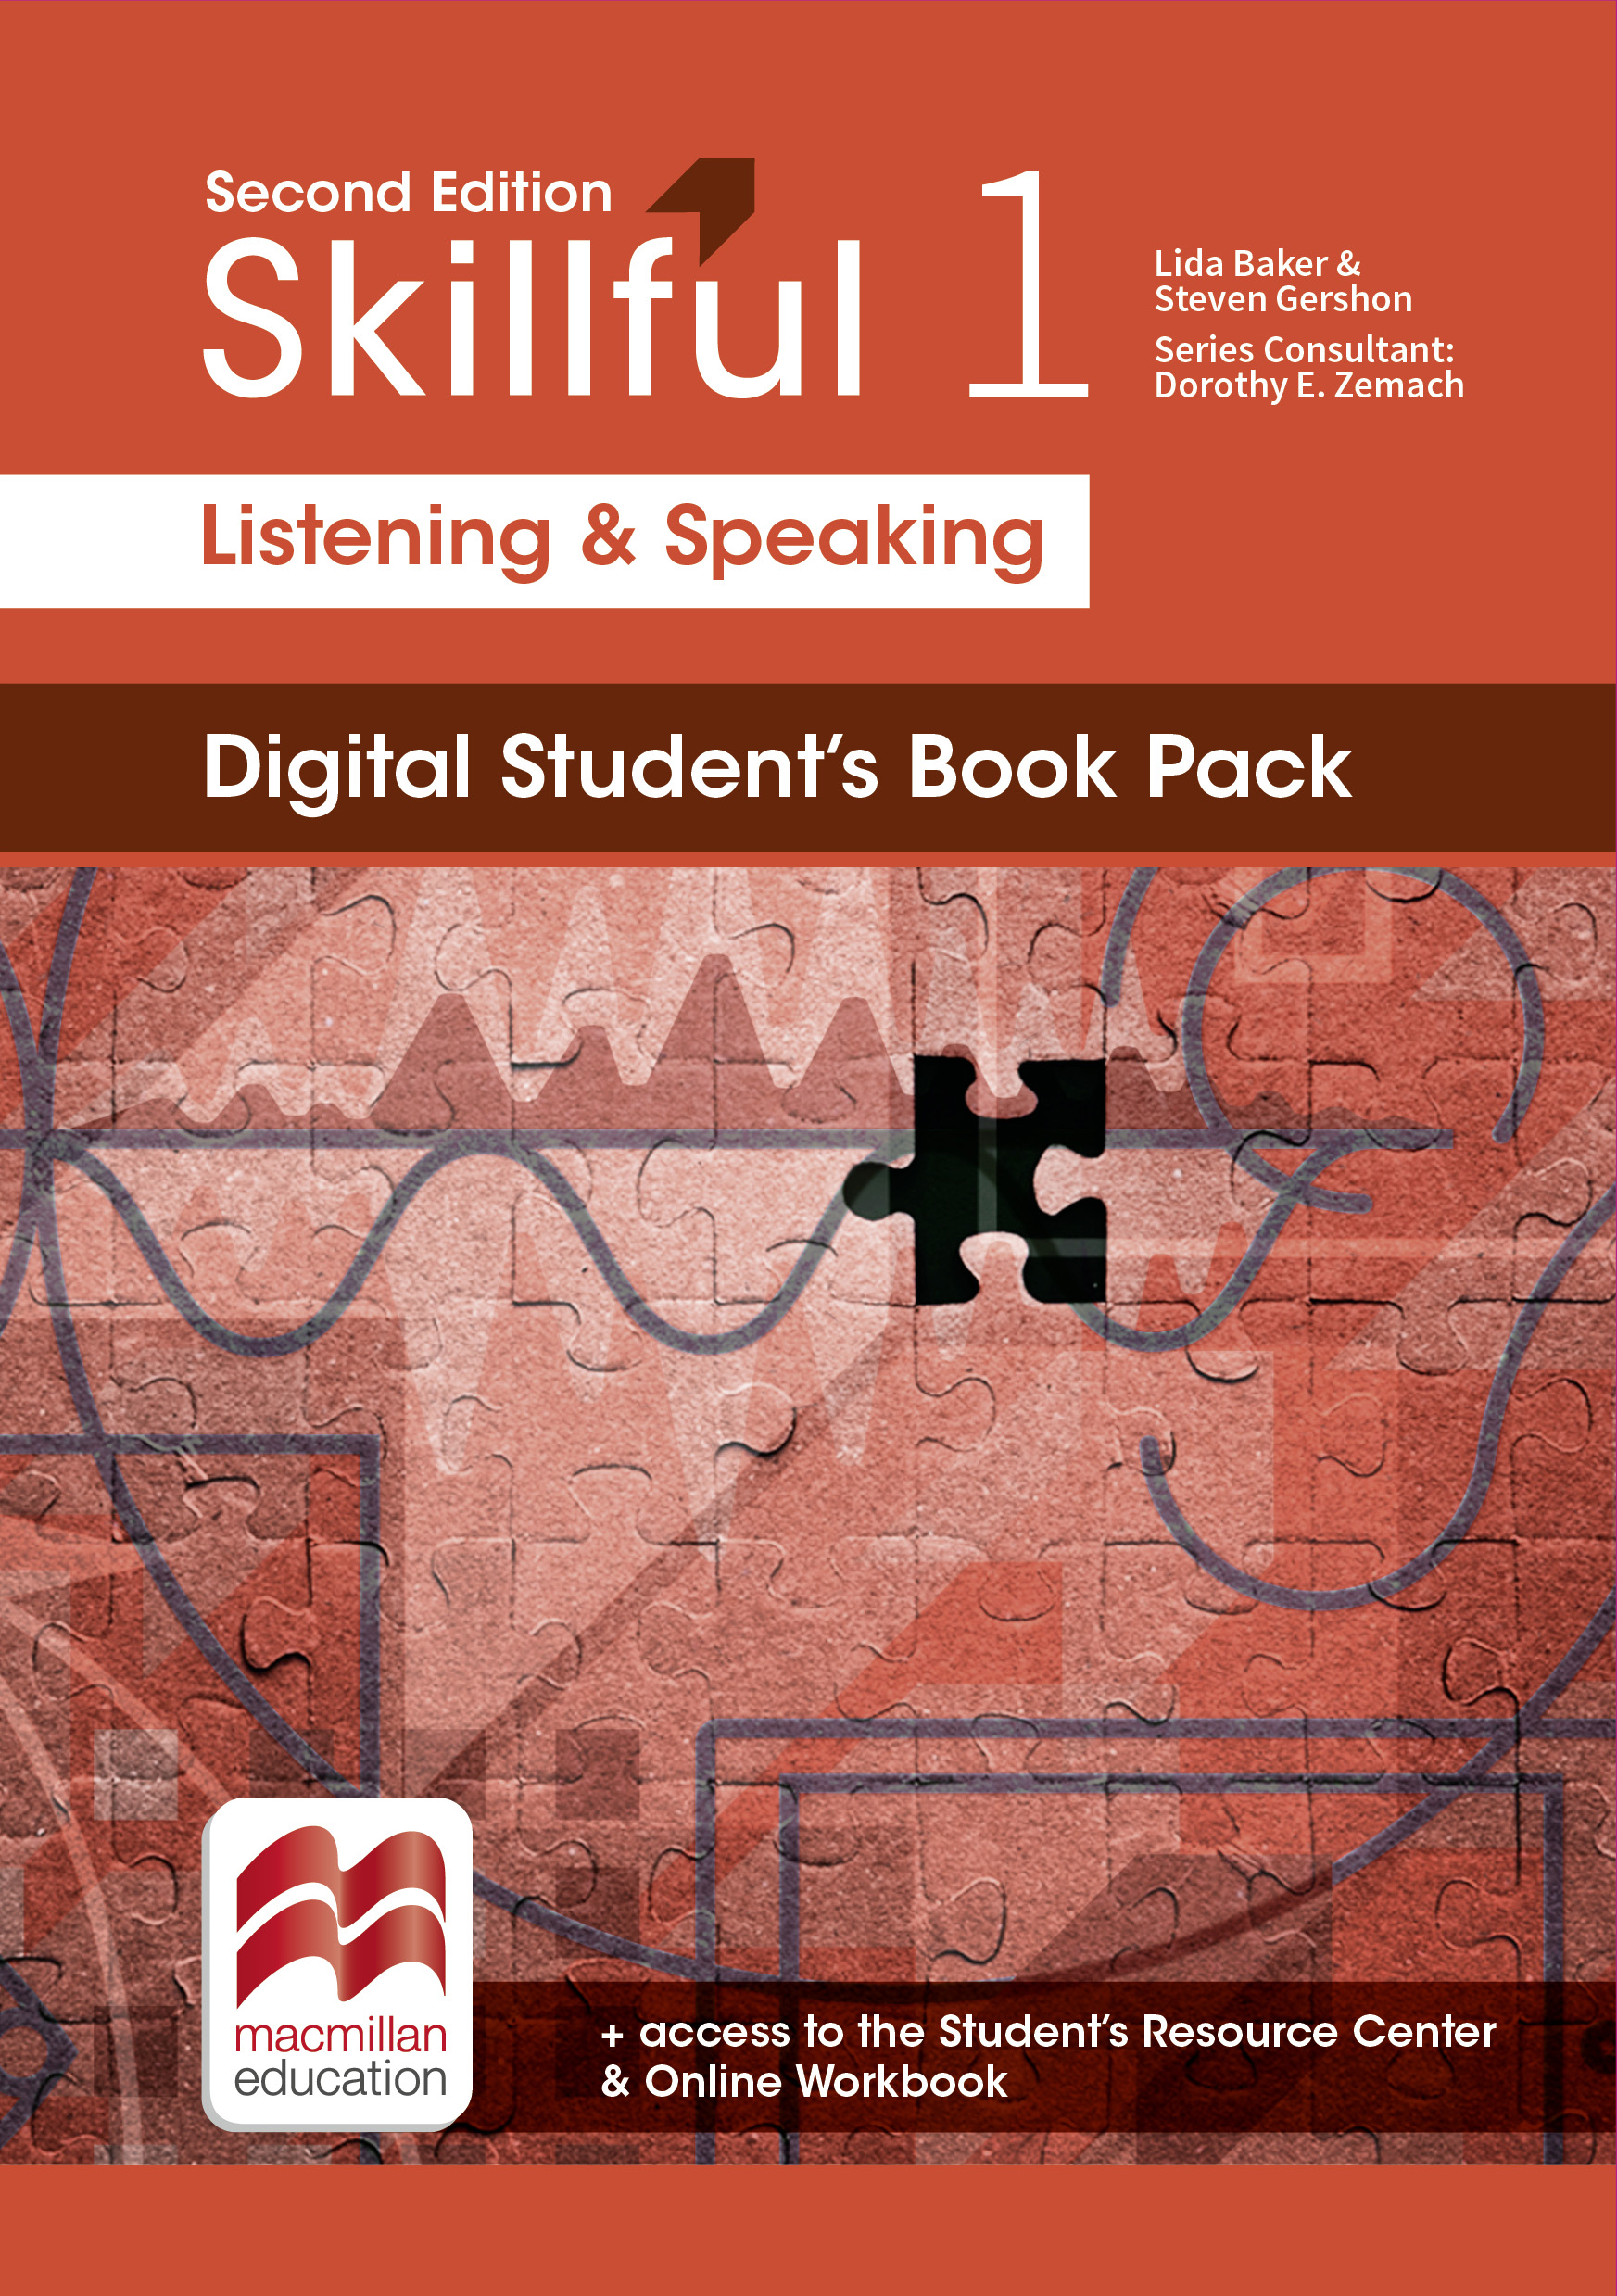 Skillful t. Skillful Listening and speaking. Skillful Listening and speaking 1 students book. Skillful Listening and speaking students book. Skillful Listening and speaking students book 4.